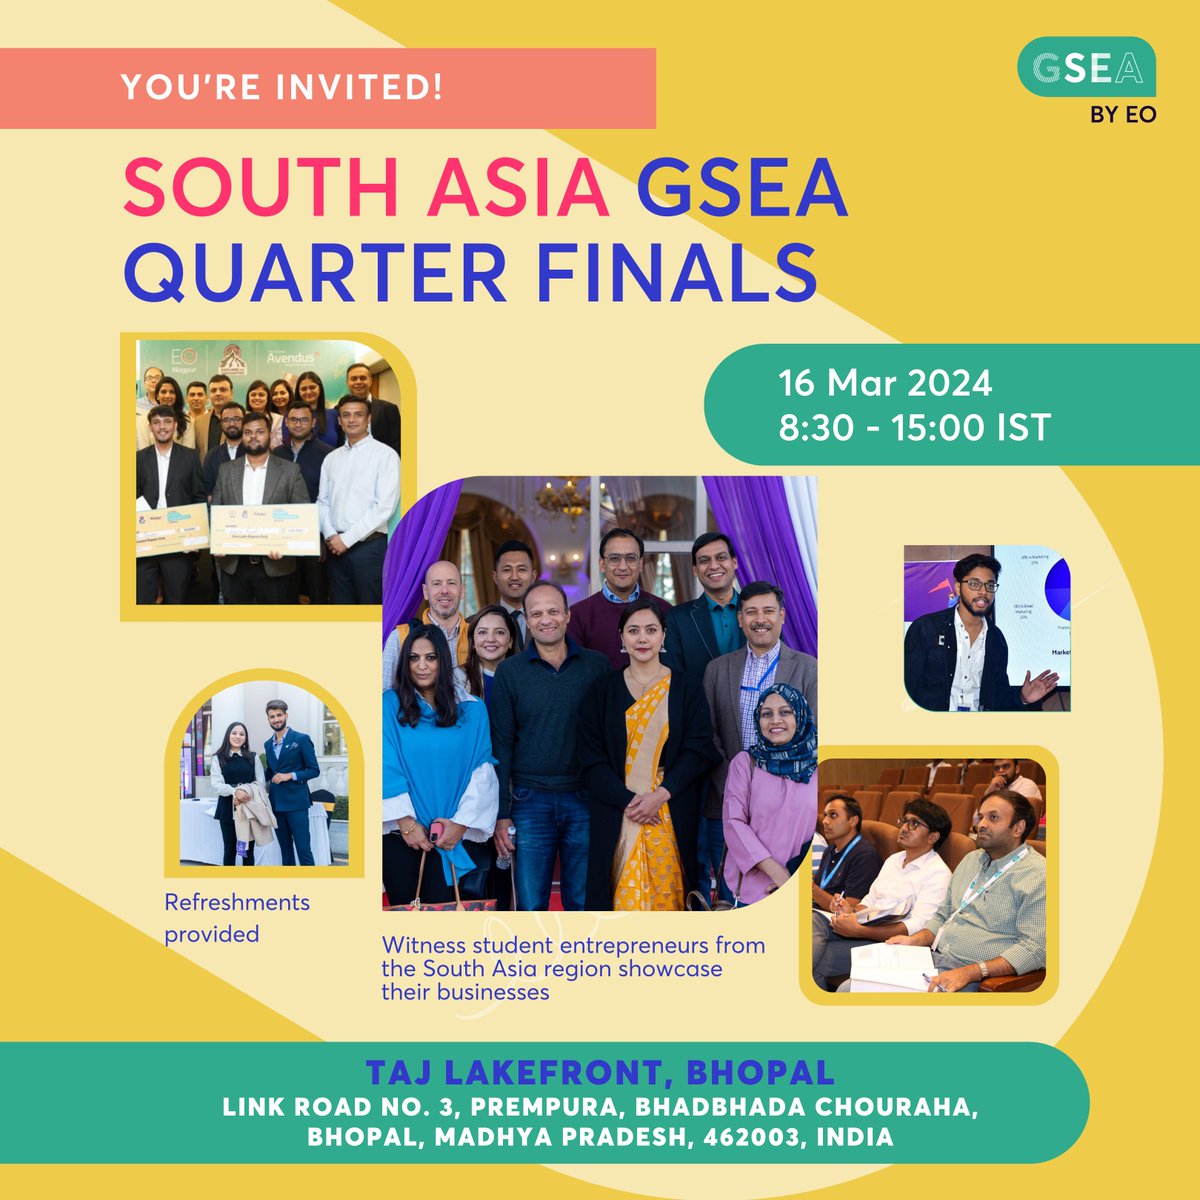 🚀 Tomorrow marks an important milestone! 🌟 In just one day, the South Asia Global Quarter Finals will kick off in Bhopal, India, where top studentpreneurs from the region will gather to present their entrepreneurial projects! 💼💡 Best of luck to all students! #EO #GSEA